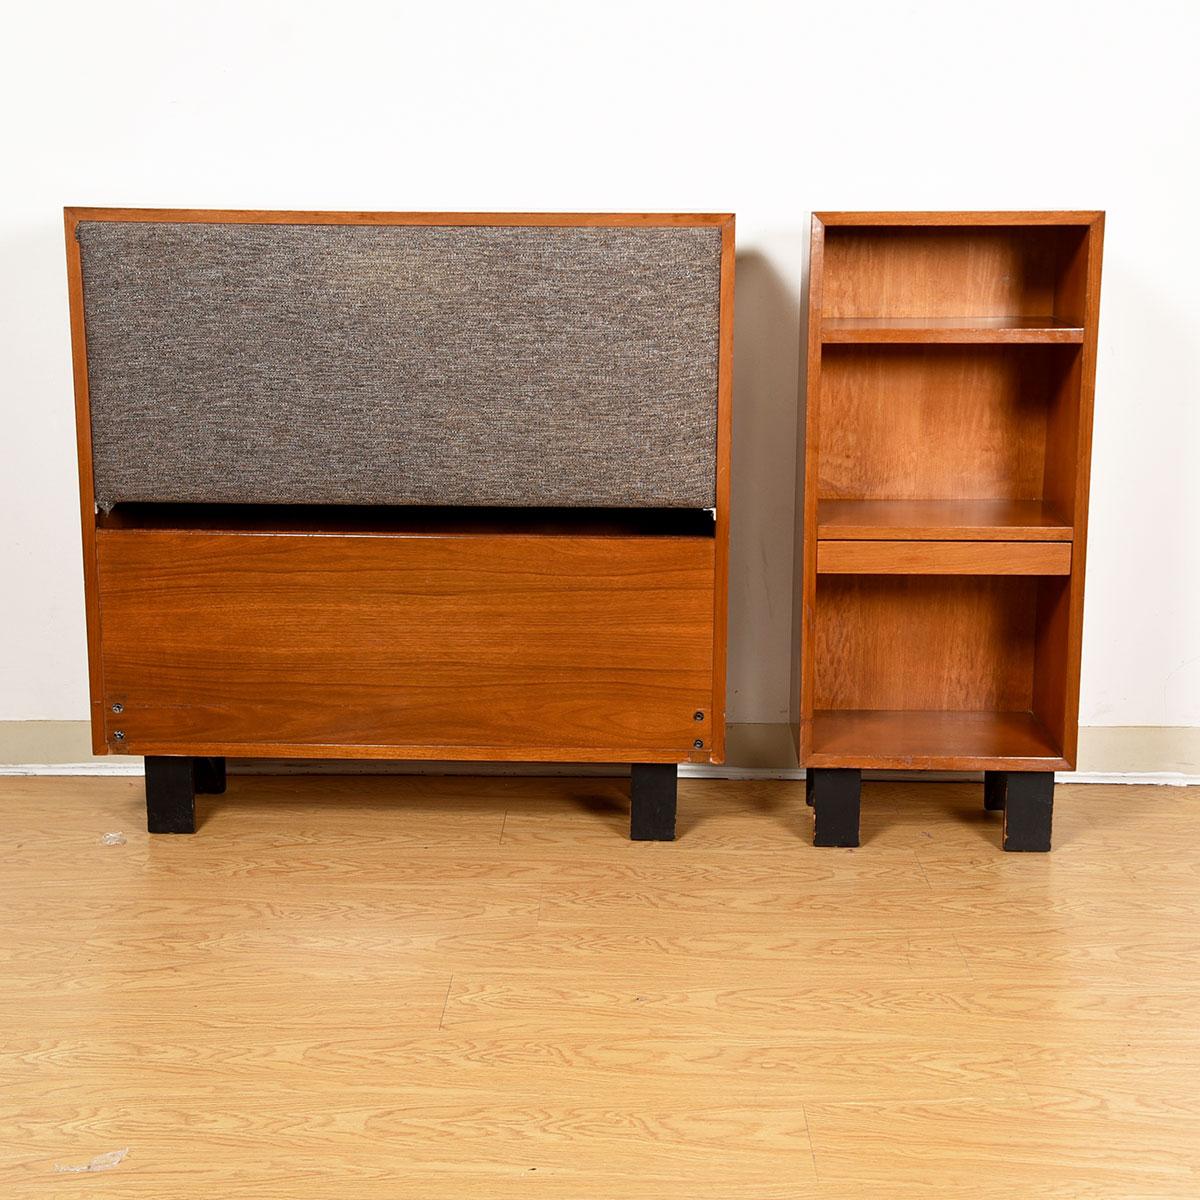 Pair of Mid-Century Modern Headboards & Nightstands by George Nelson In Excellent Condition For Sale In Kensington, MD